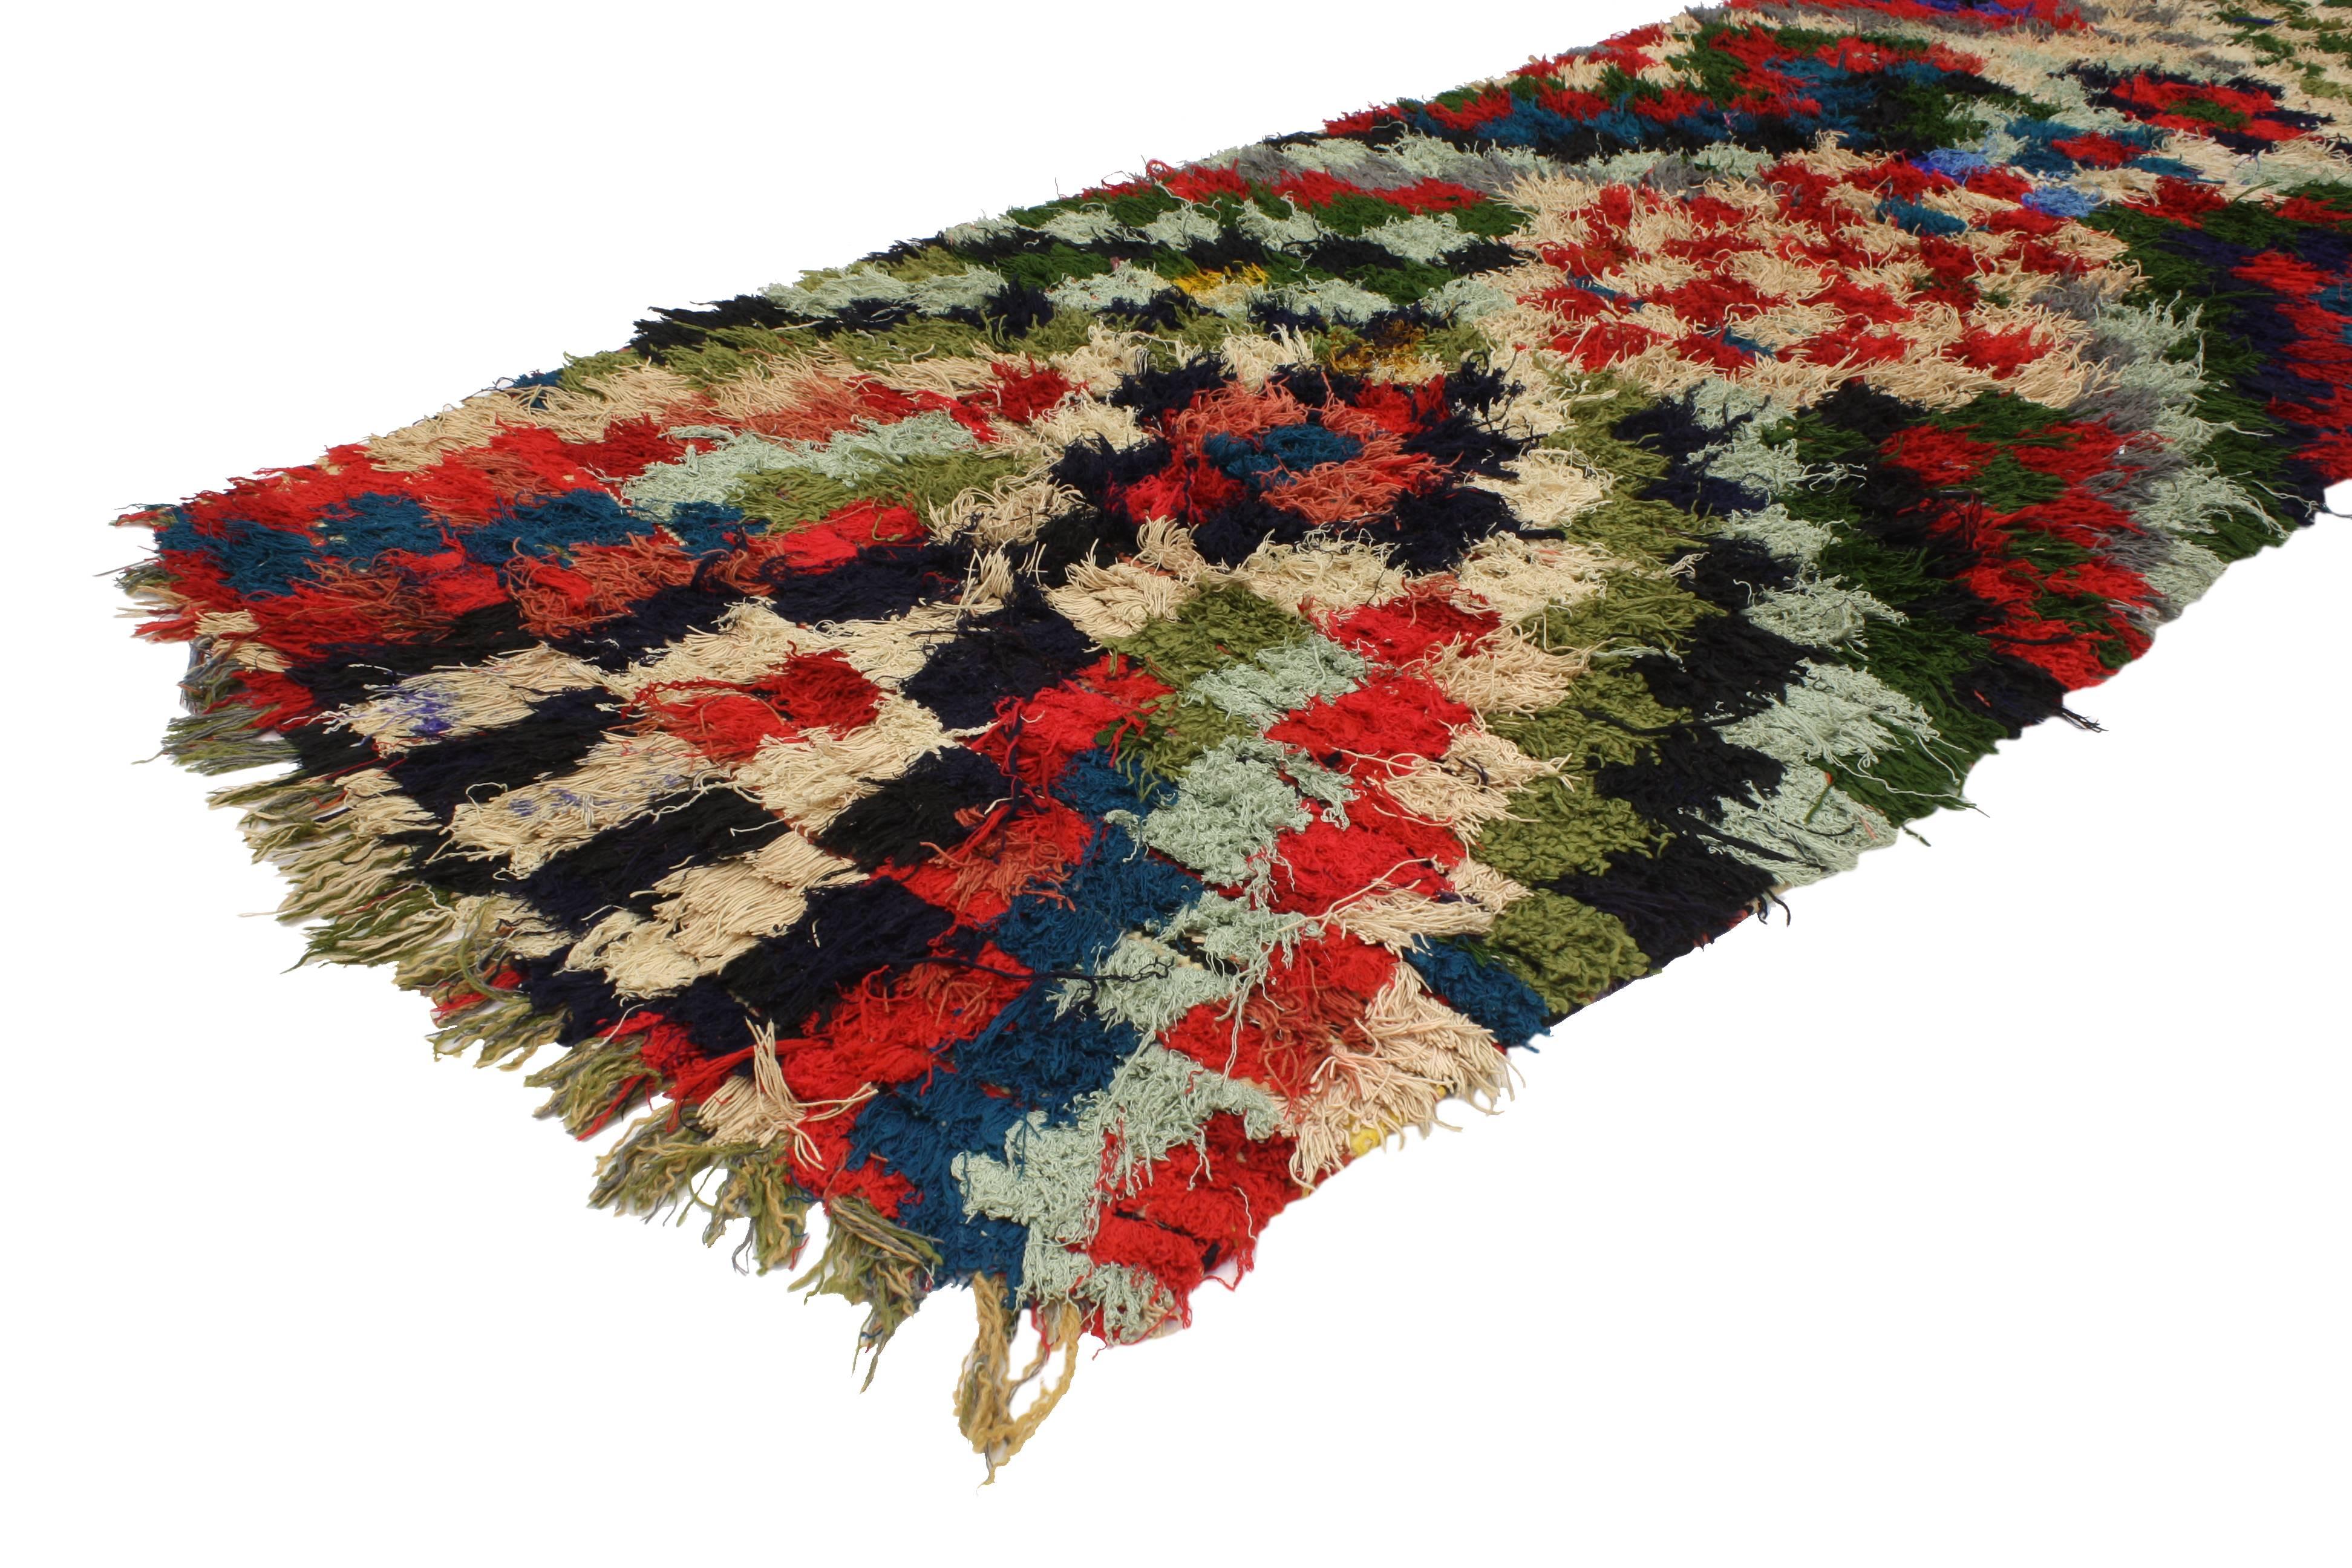 20381 Vintage Boucherouite Moroccan Runner, Colorful Moroccan Shag Hallway Runner. This Mid-Century Modern Moroccan runner features a checkerboard design woven in a striking combination of red, blue, black, green and cream. This vibrant and high